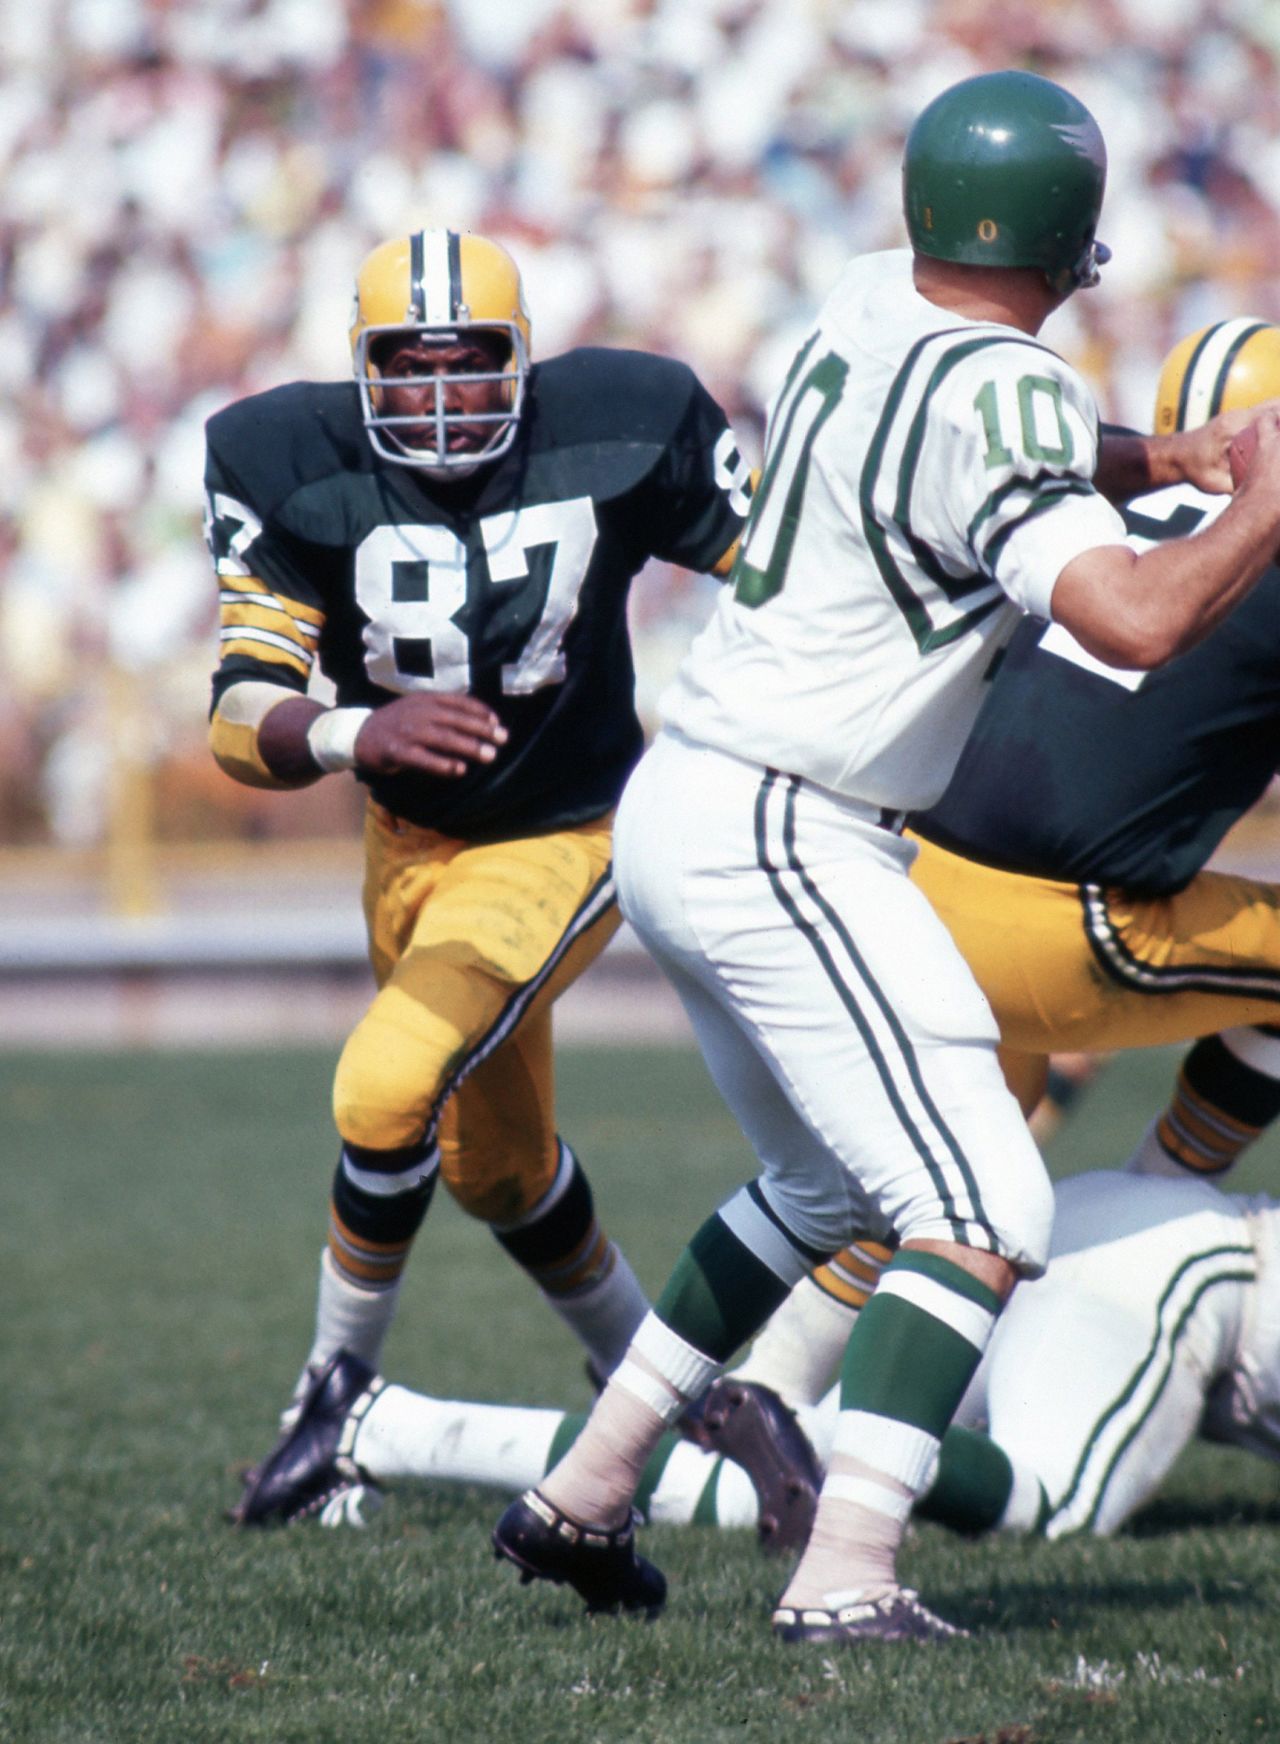 NFL Hall of Famer <a href="https://www.cnn.com/2020/04/15/us/willie-davis-death-obit-trnd/index.html" target="_blank">Willie Davis</a> died April 15 at the age of 85, according to the Green Bay Packers. The defensive end, who in 1965 became the first black captain for the Packers, spent 10 years with the team.